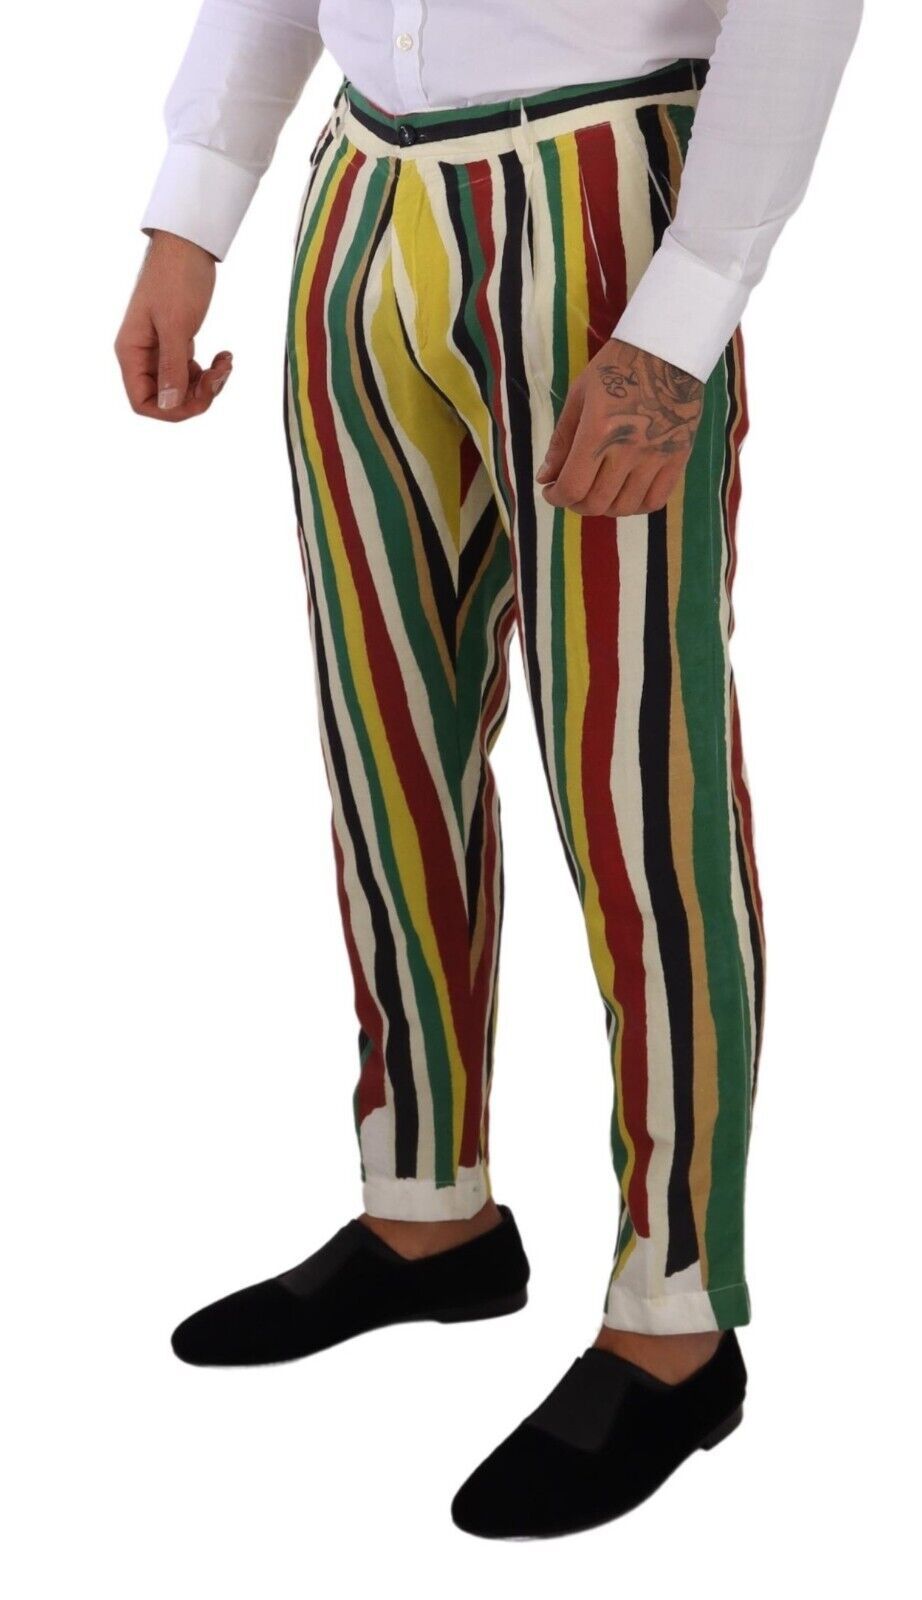 Dolce & Gabbana Multicolor Striped Linen Cotton Pants - Gio Beverly Hills